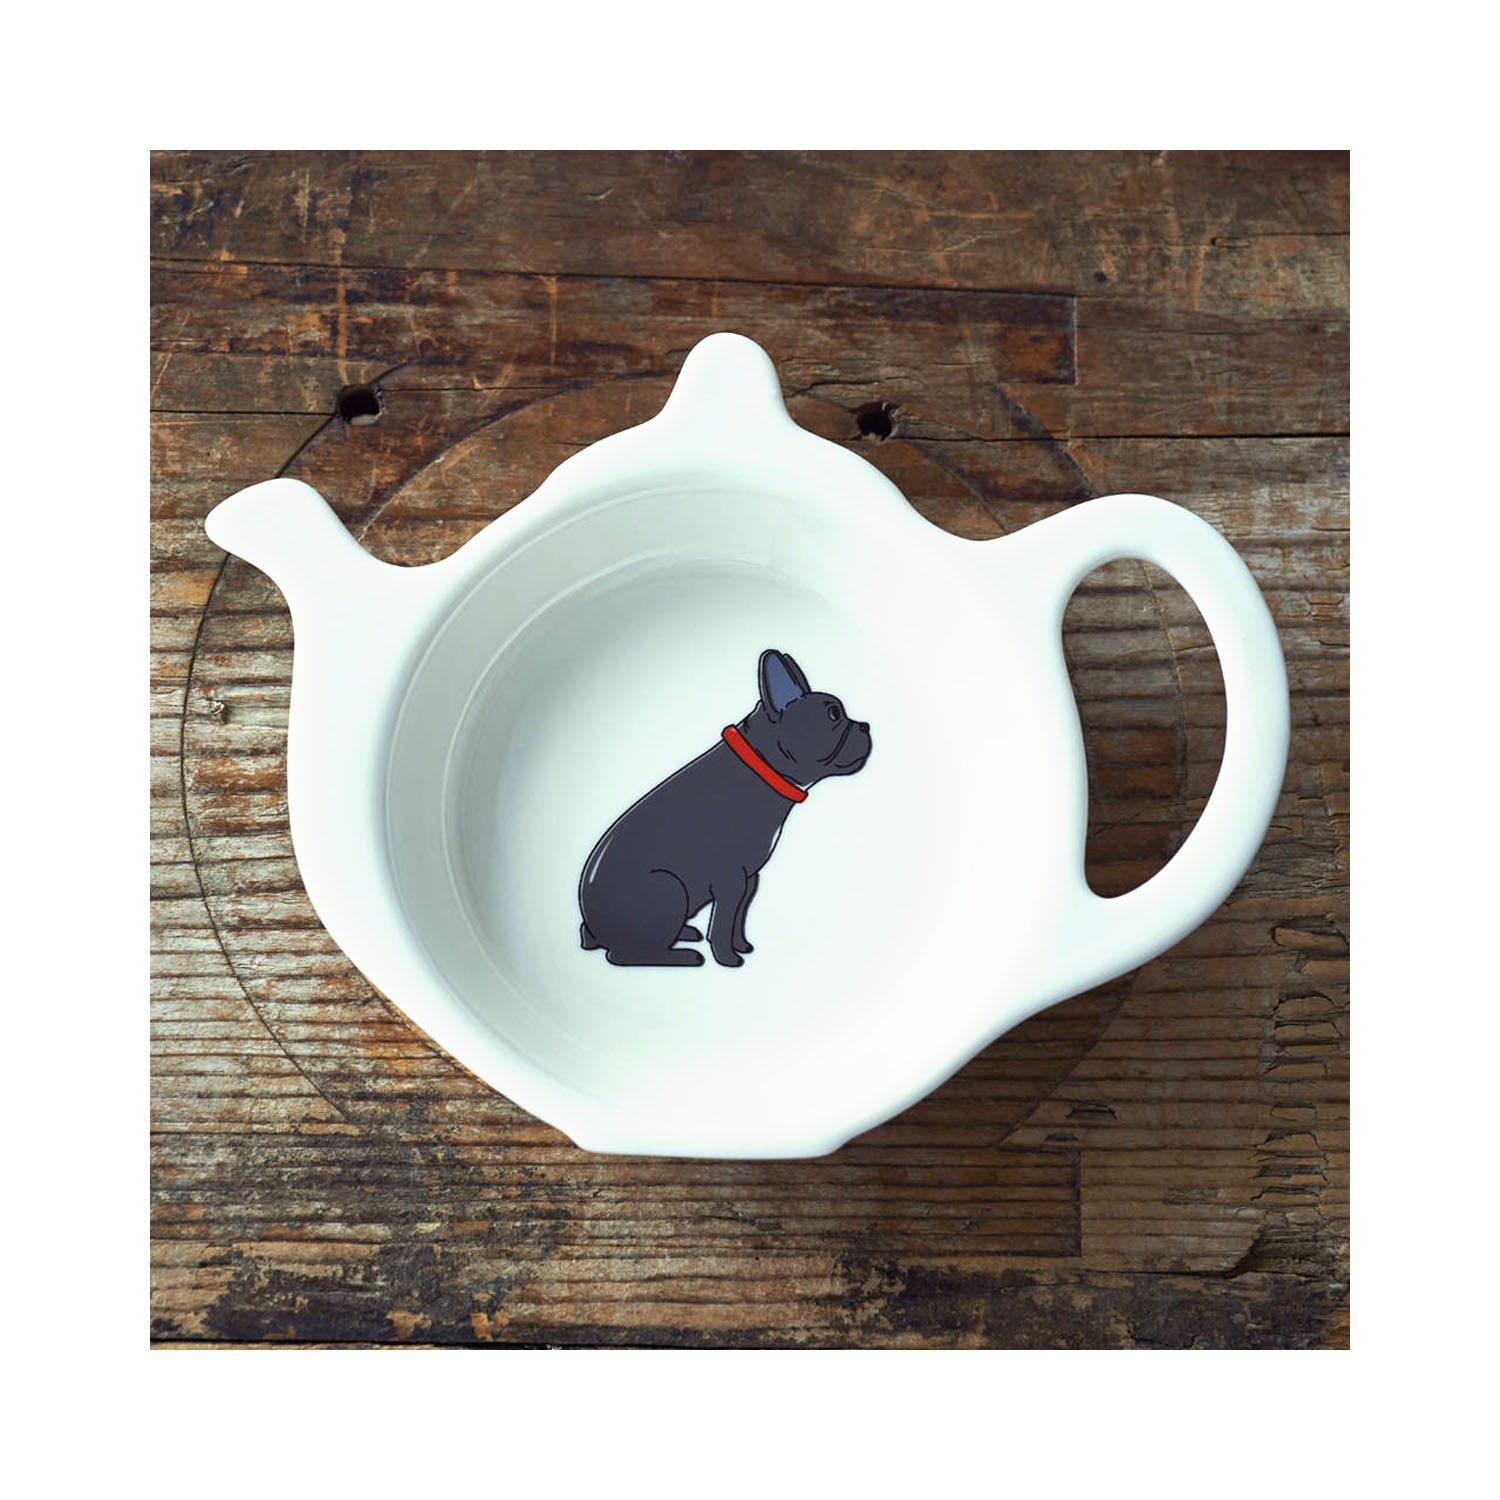 Dog Lover Gifts available at Dog Krazy Gifts - Freddie The French Bulldog Teabag Dish - part of the Sweet William range available from Dog Krazy Gifts